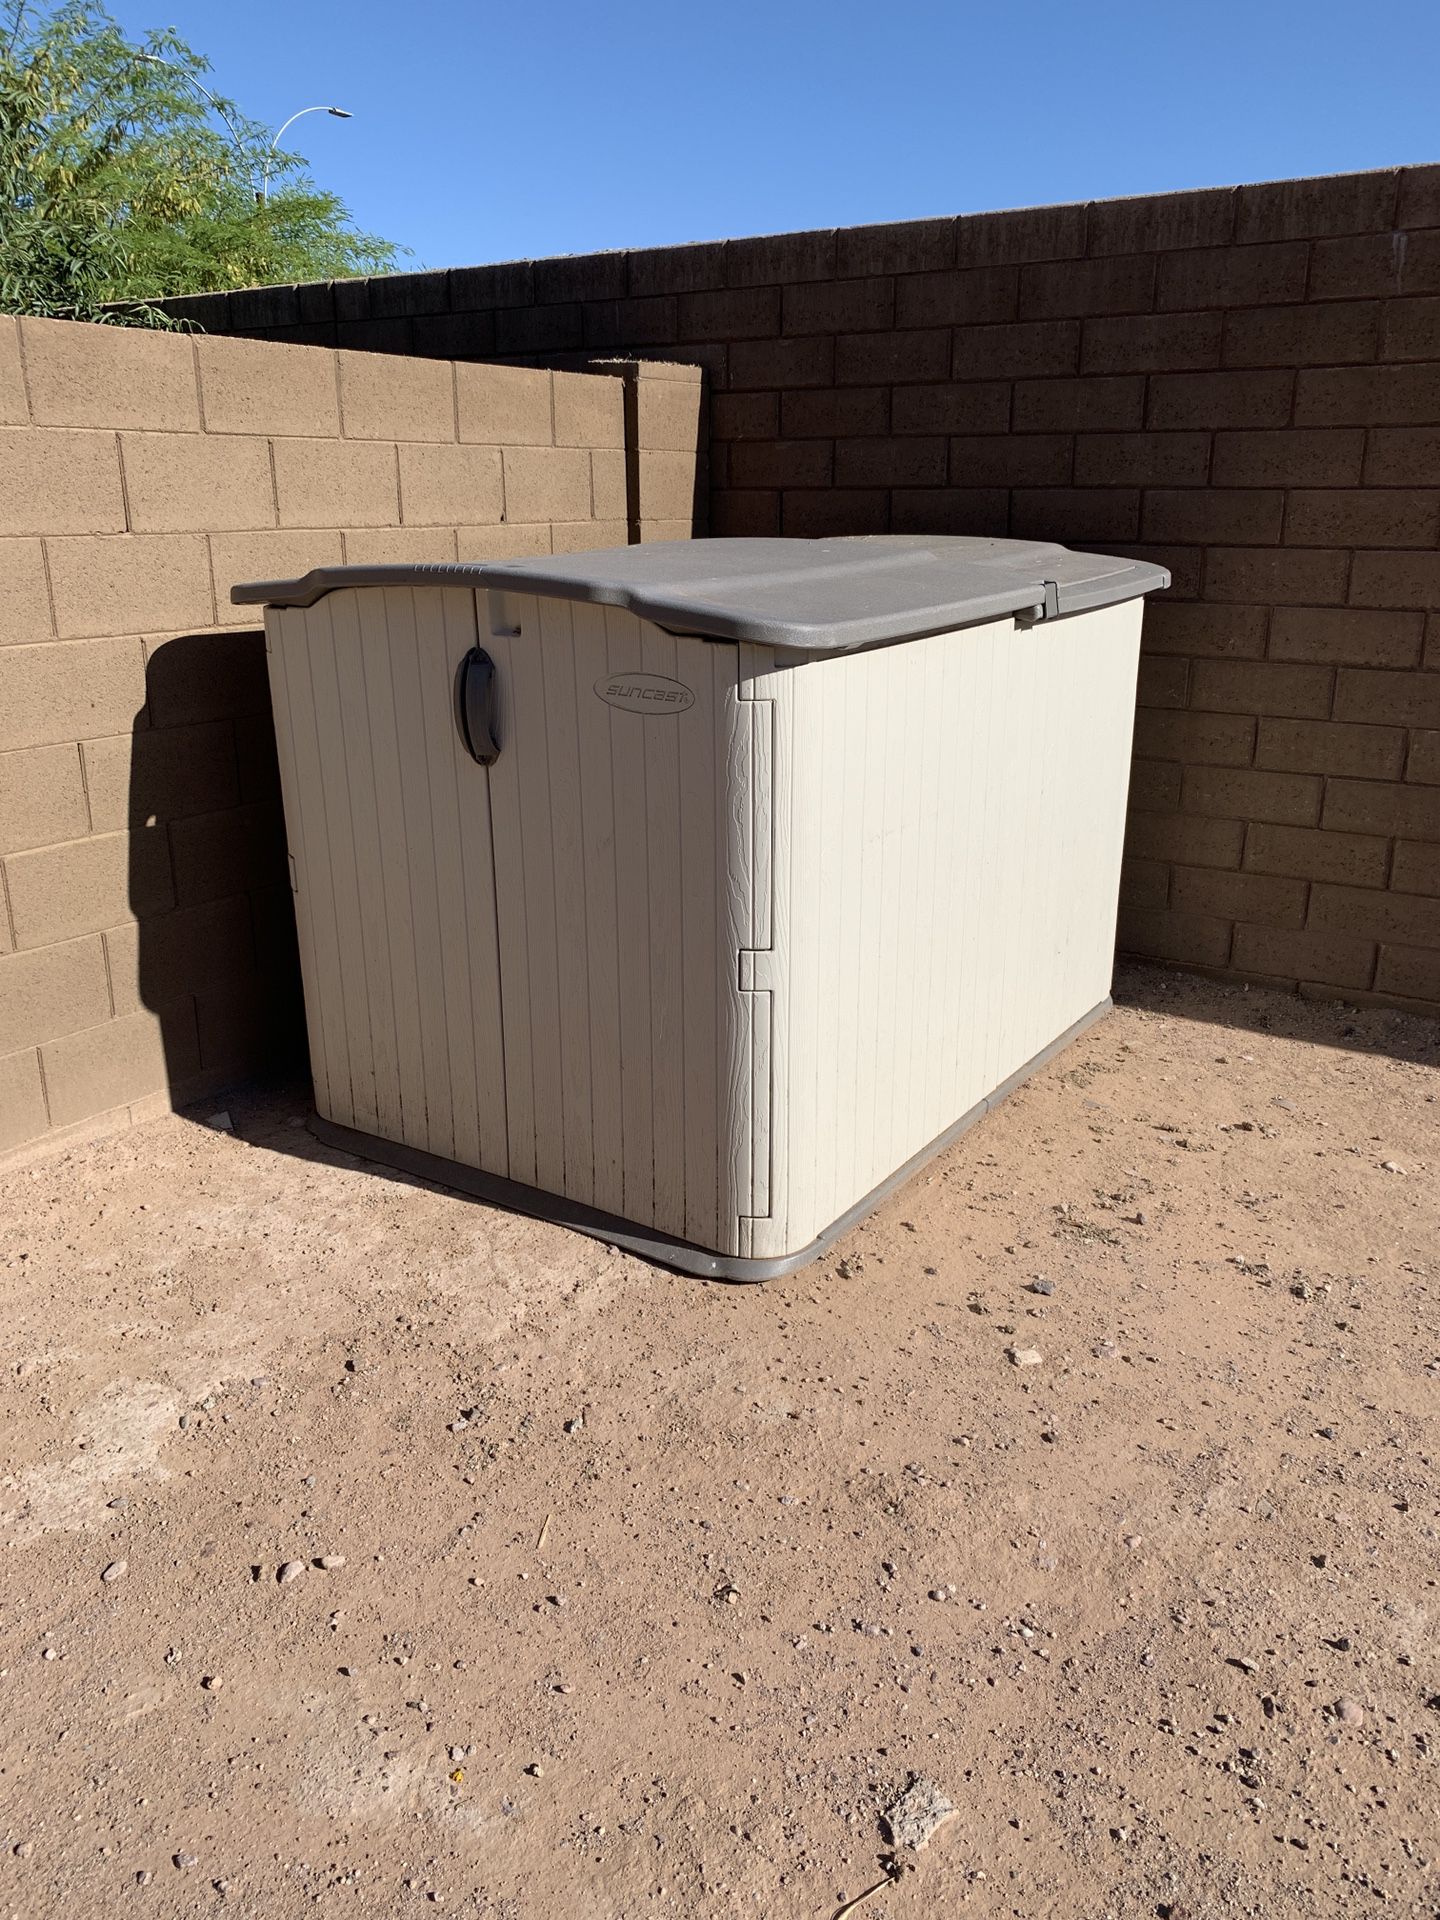 Suncrest Storage Shed - less than year old